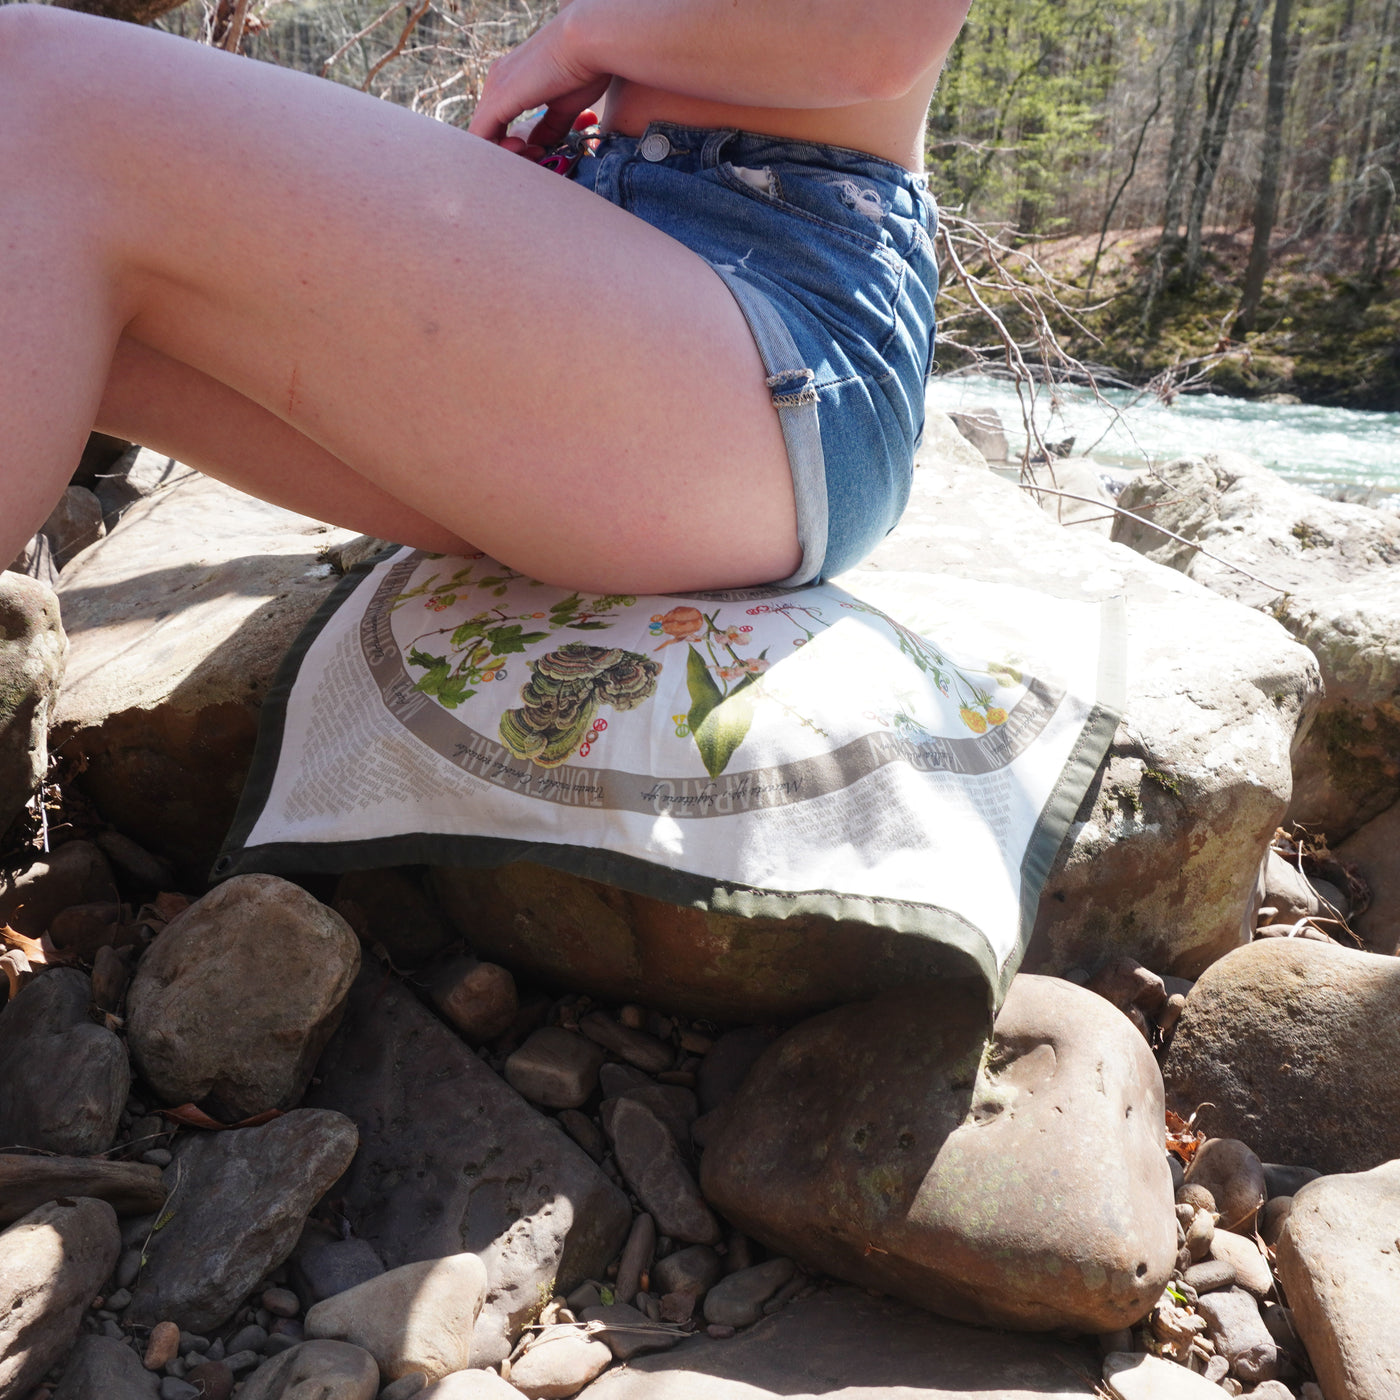 Cotton water resistant ground cloth adding comfort to a river rock seat